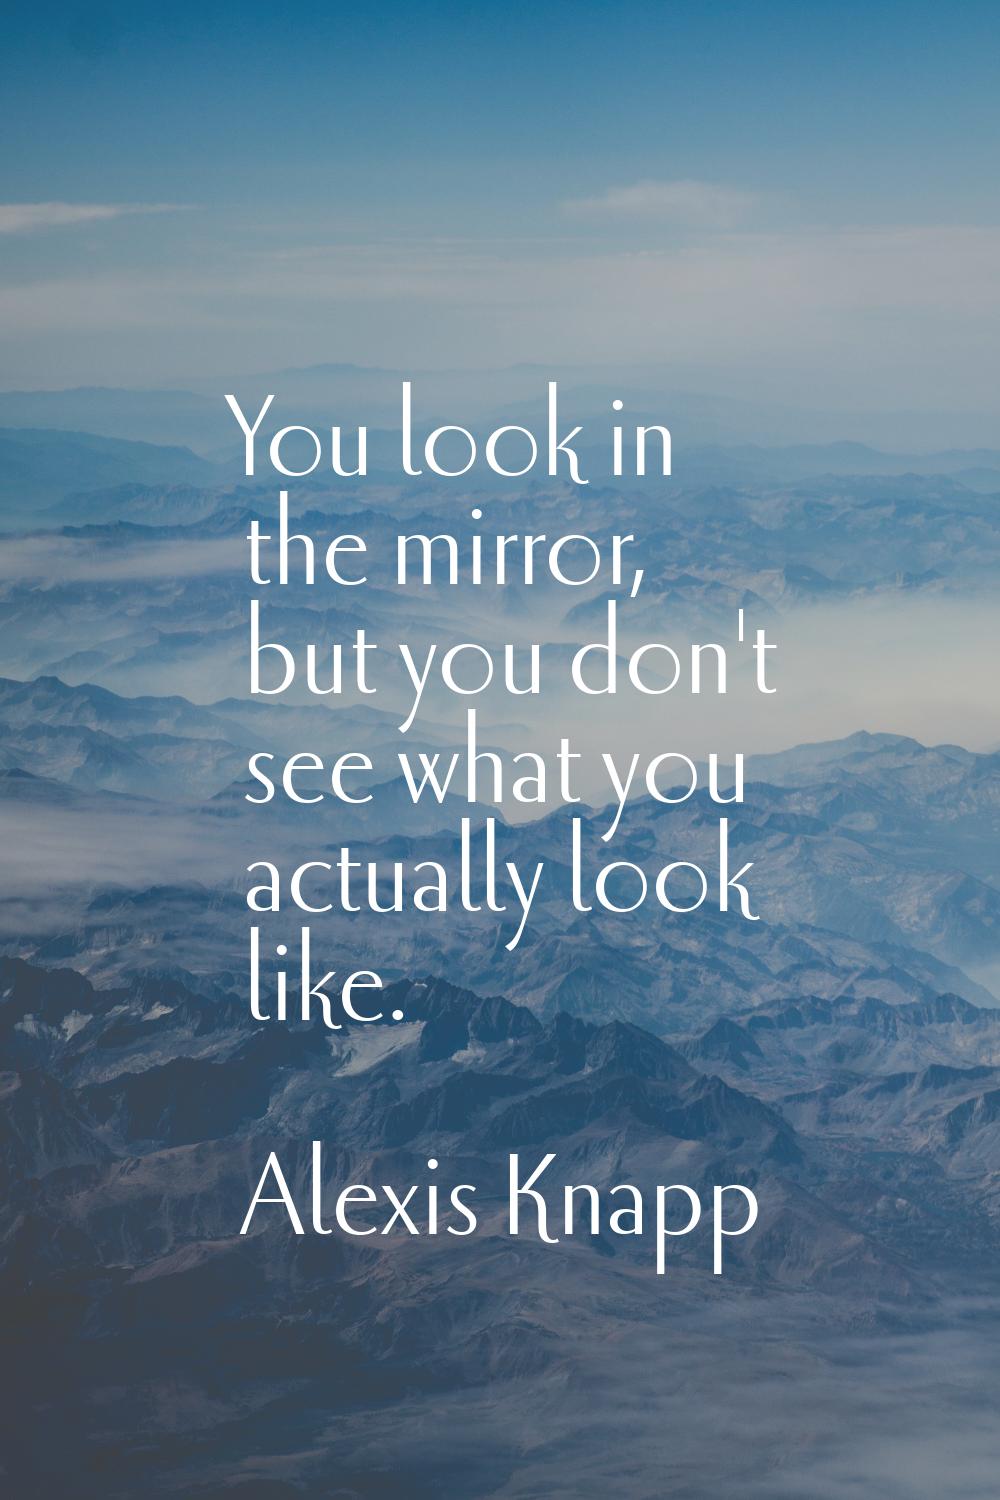 You look in the mirror, but you don't see what you actually look like.